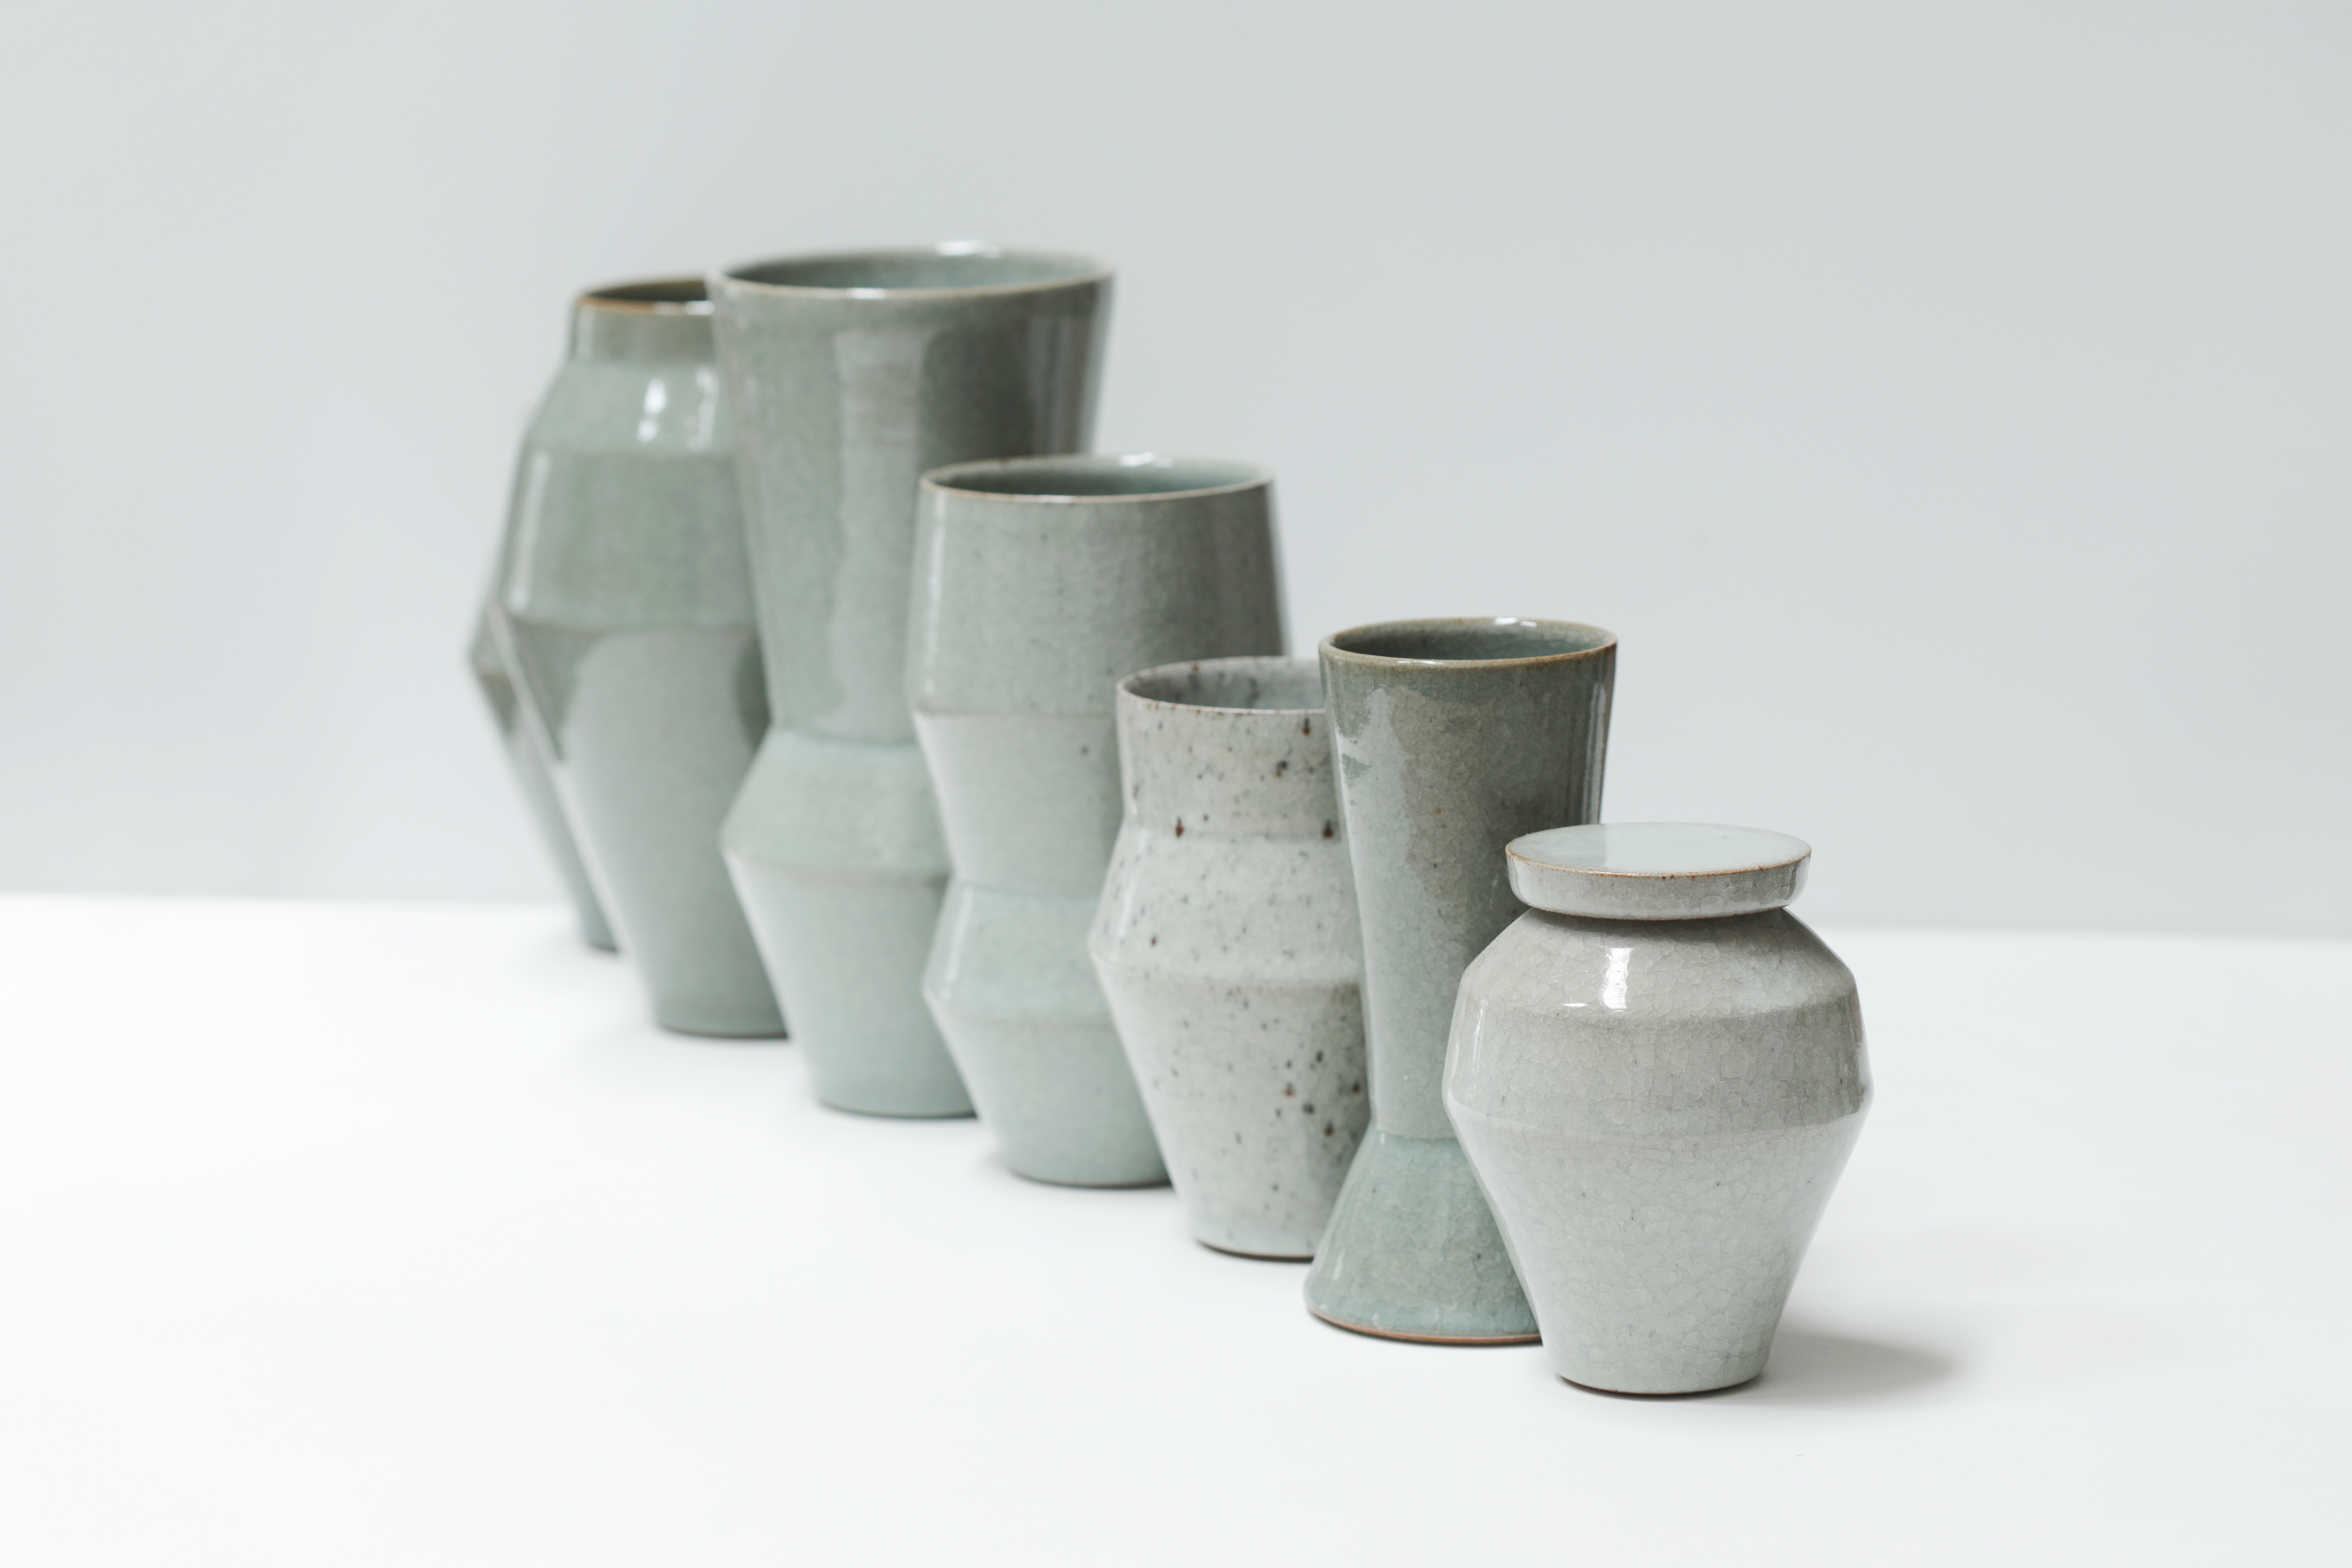 Six green-toned ceramic vases and lidded pots in a row